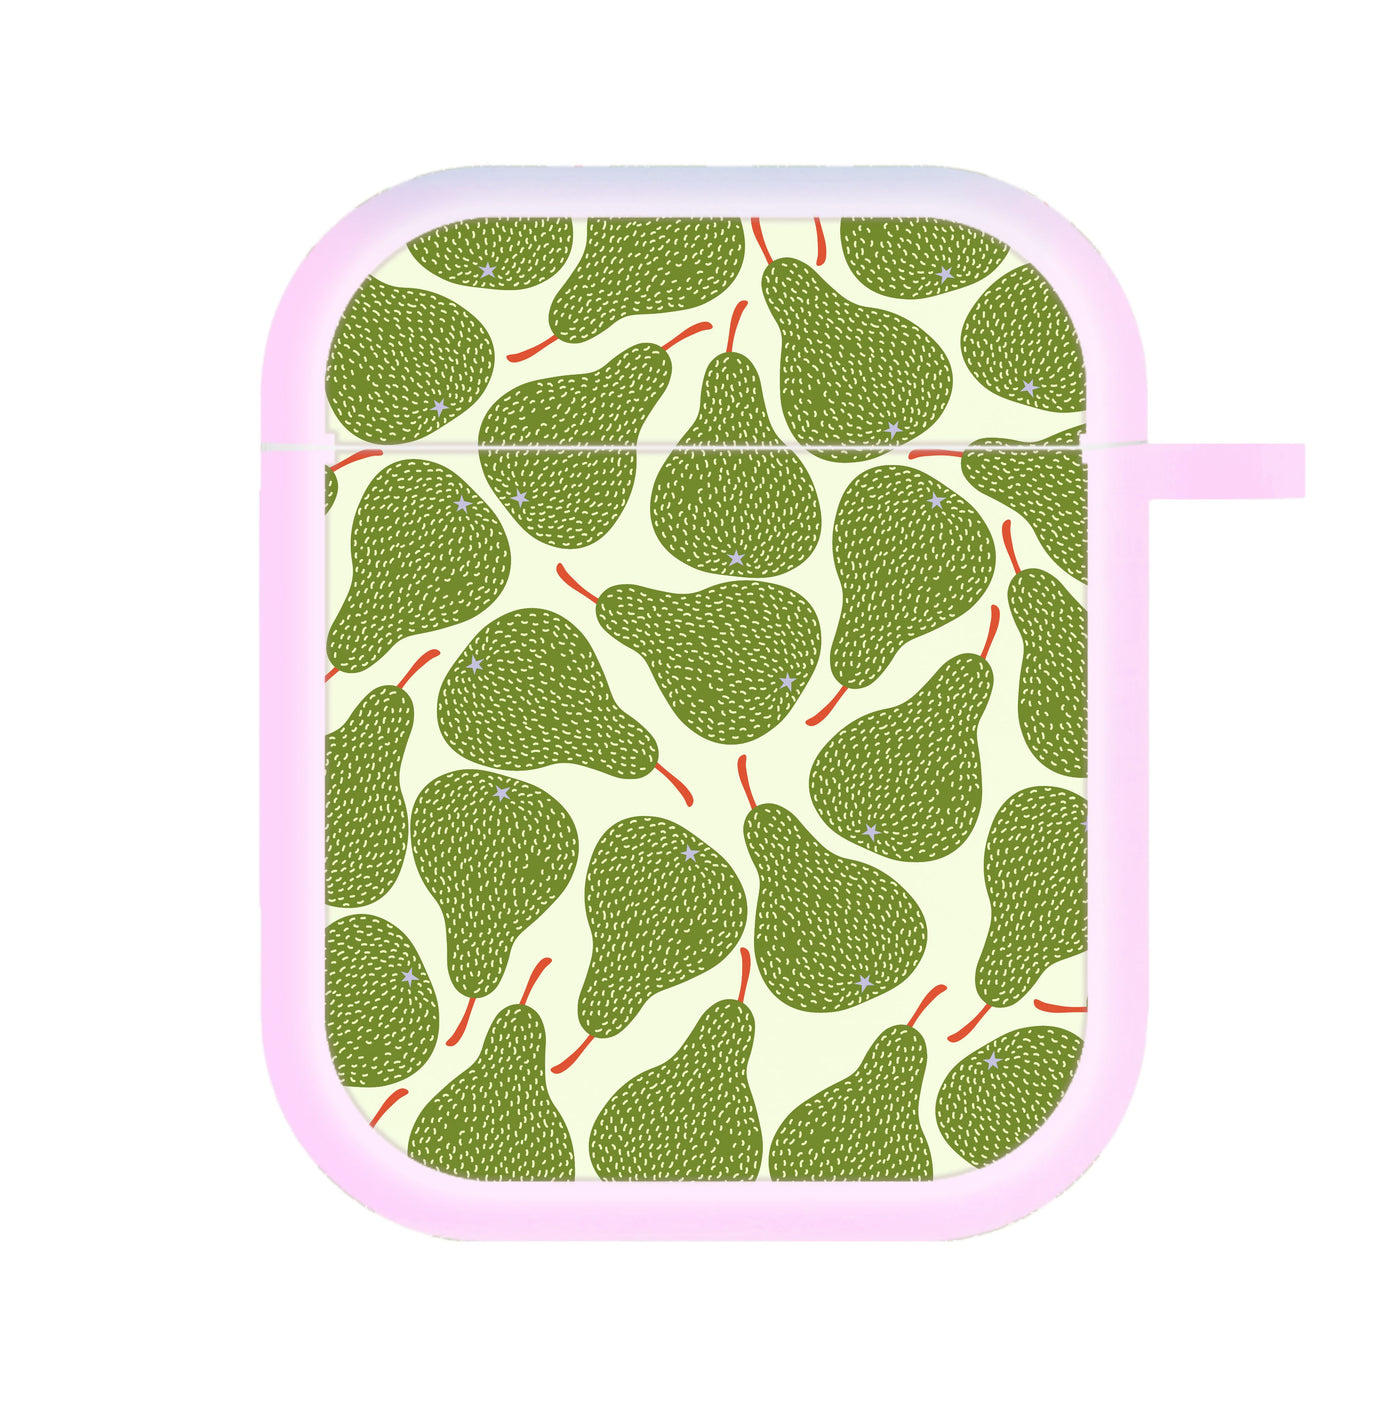 Pears - Fruit Patterns AirPods Case